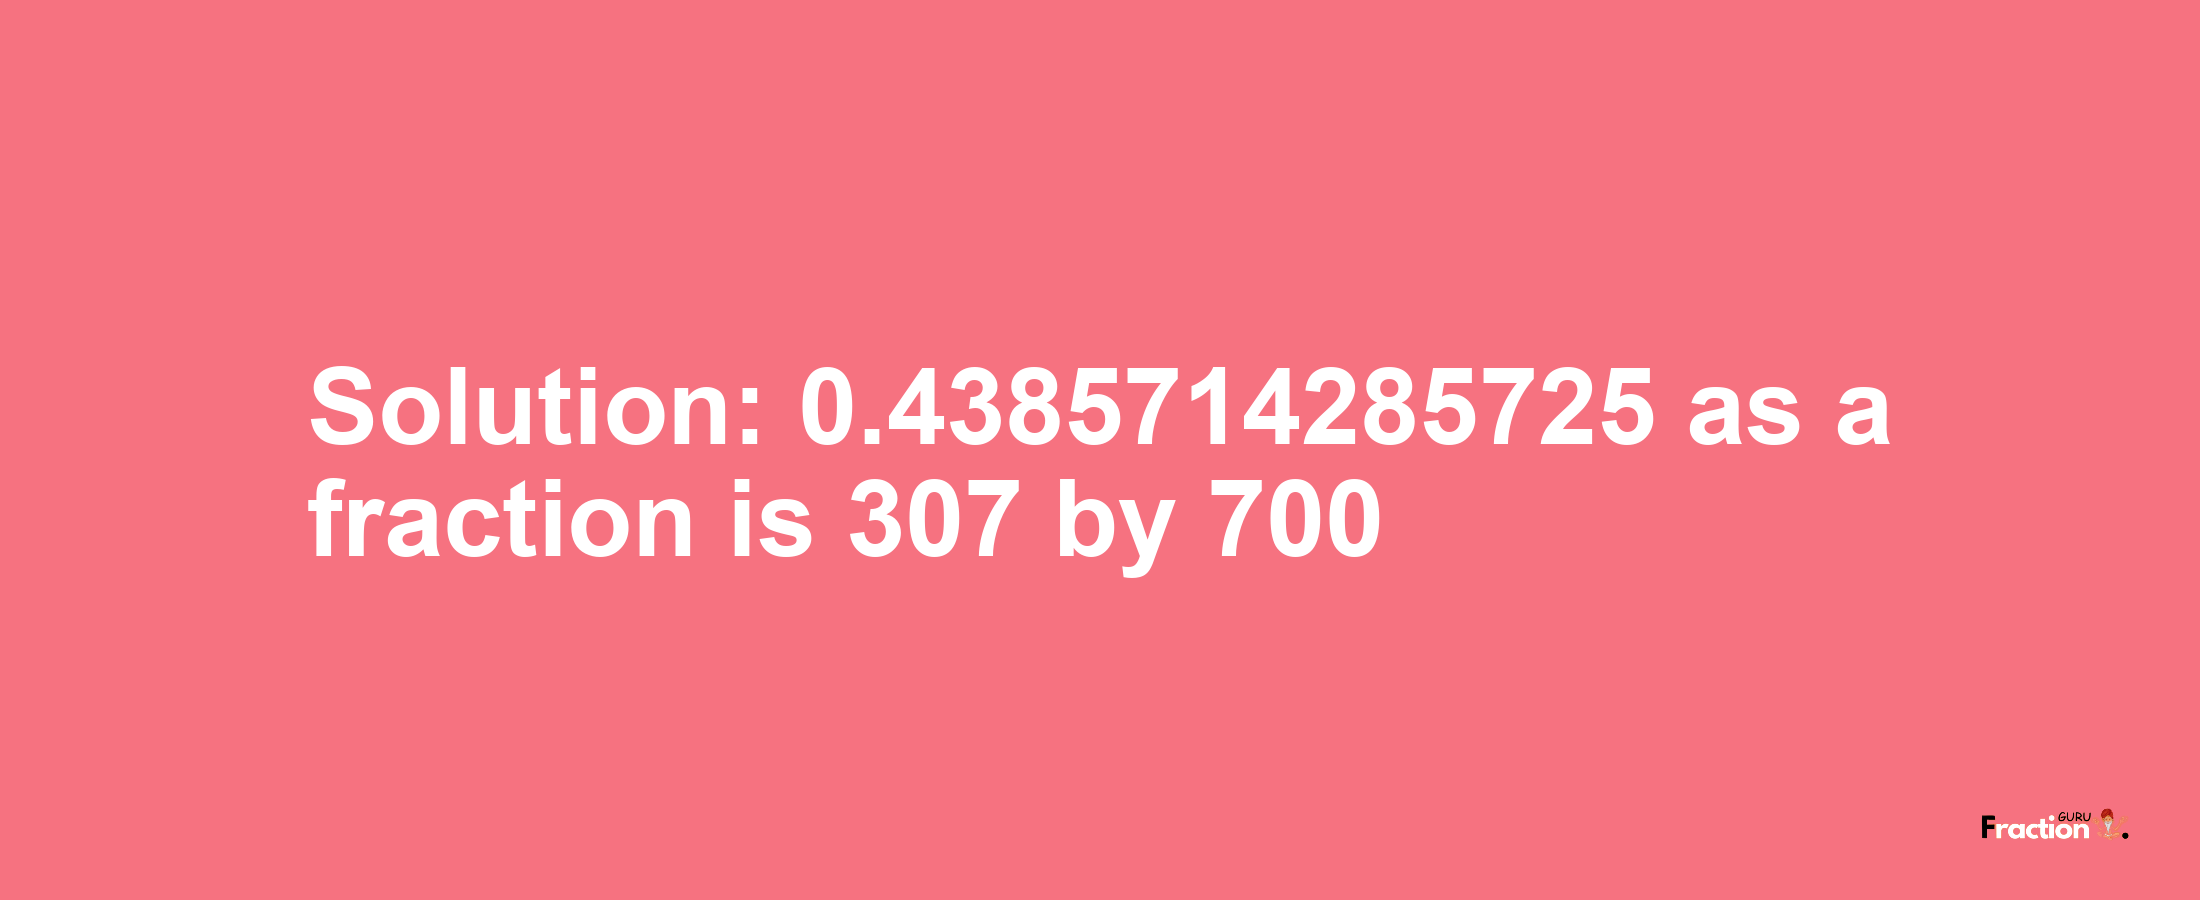 Solution:0.4385714285725 as a fraction is 307/700